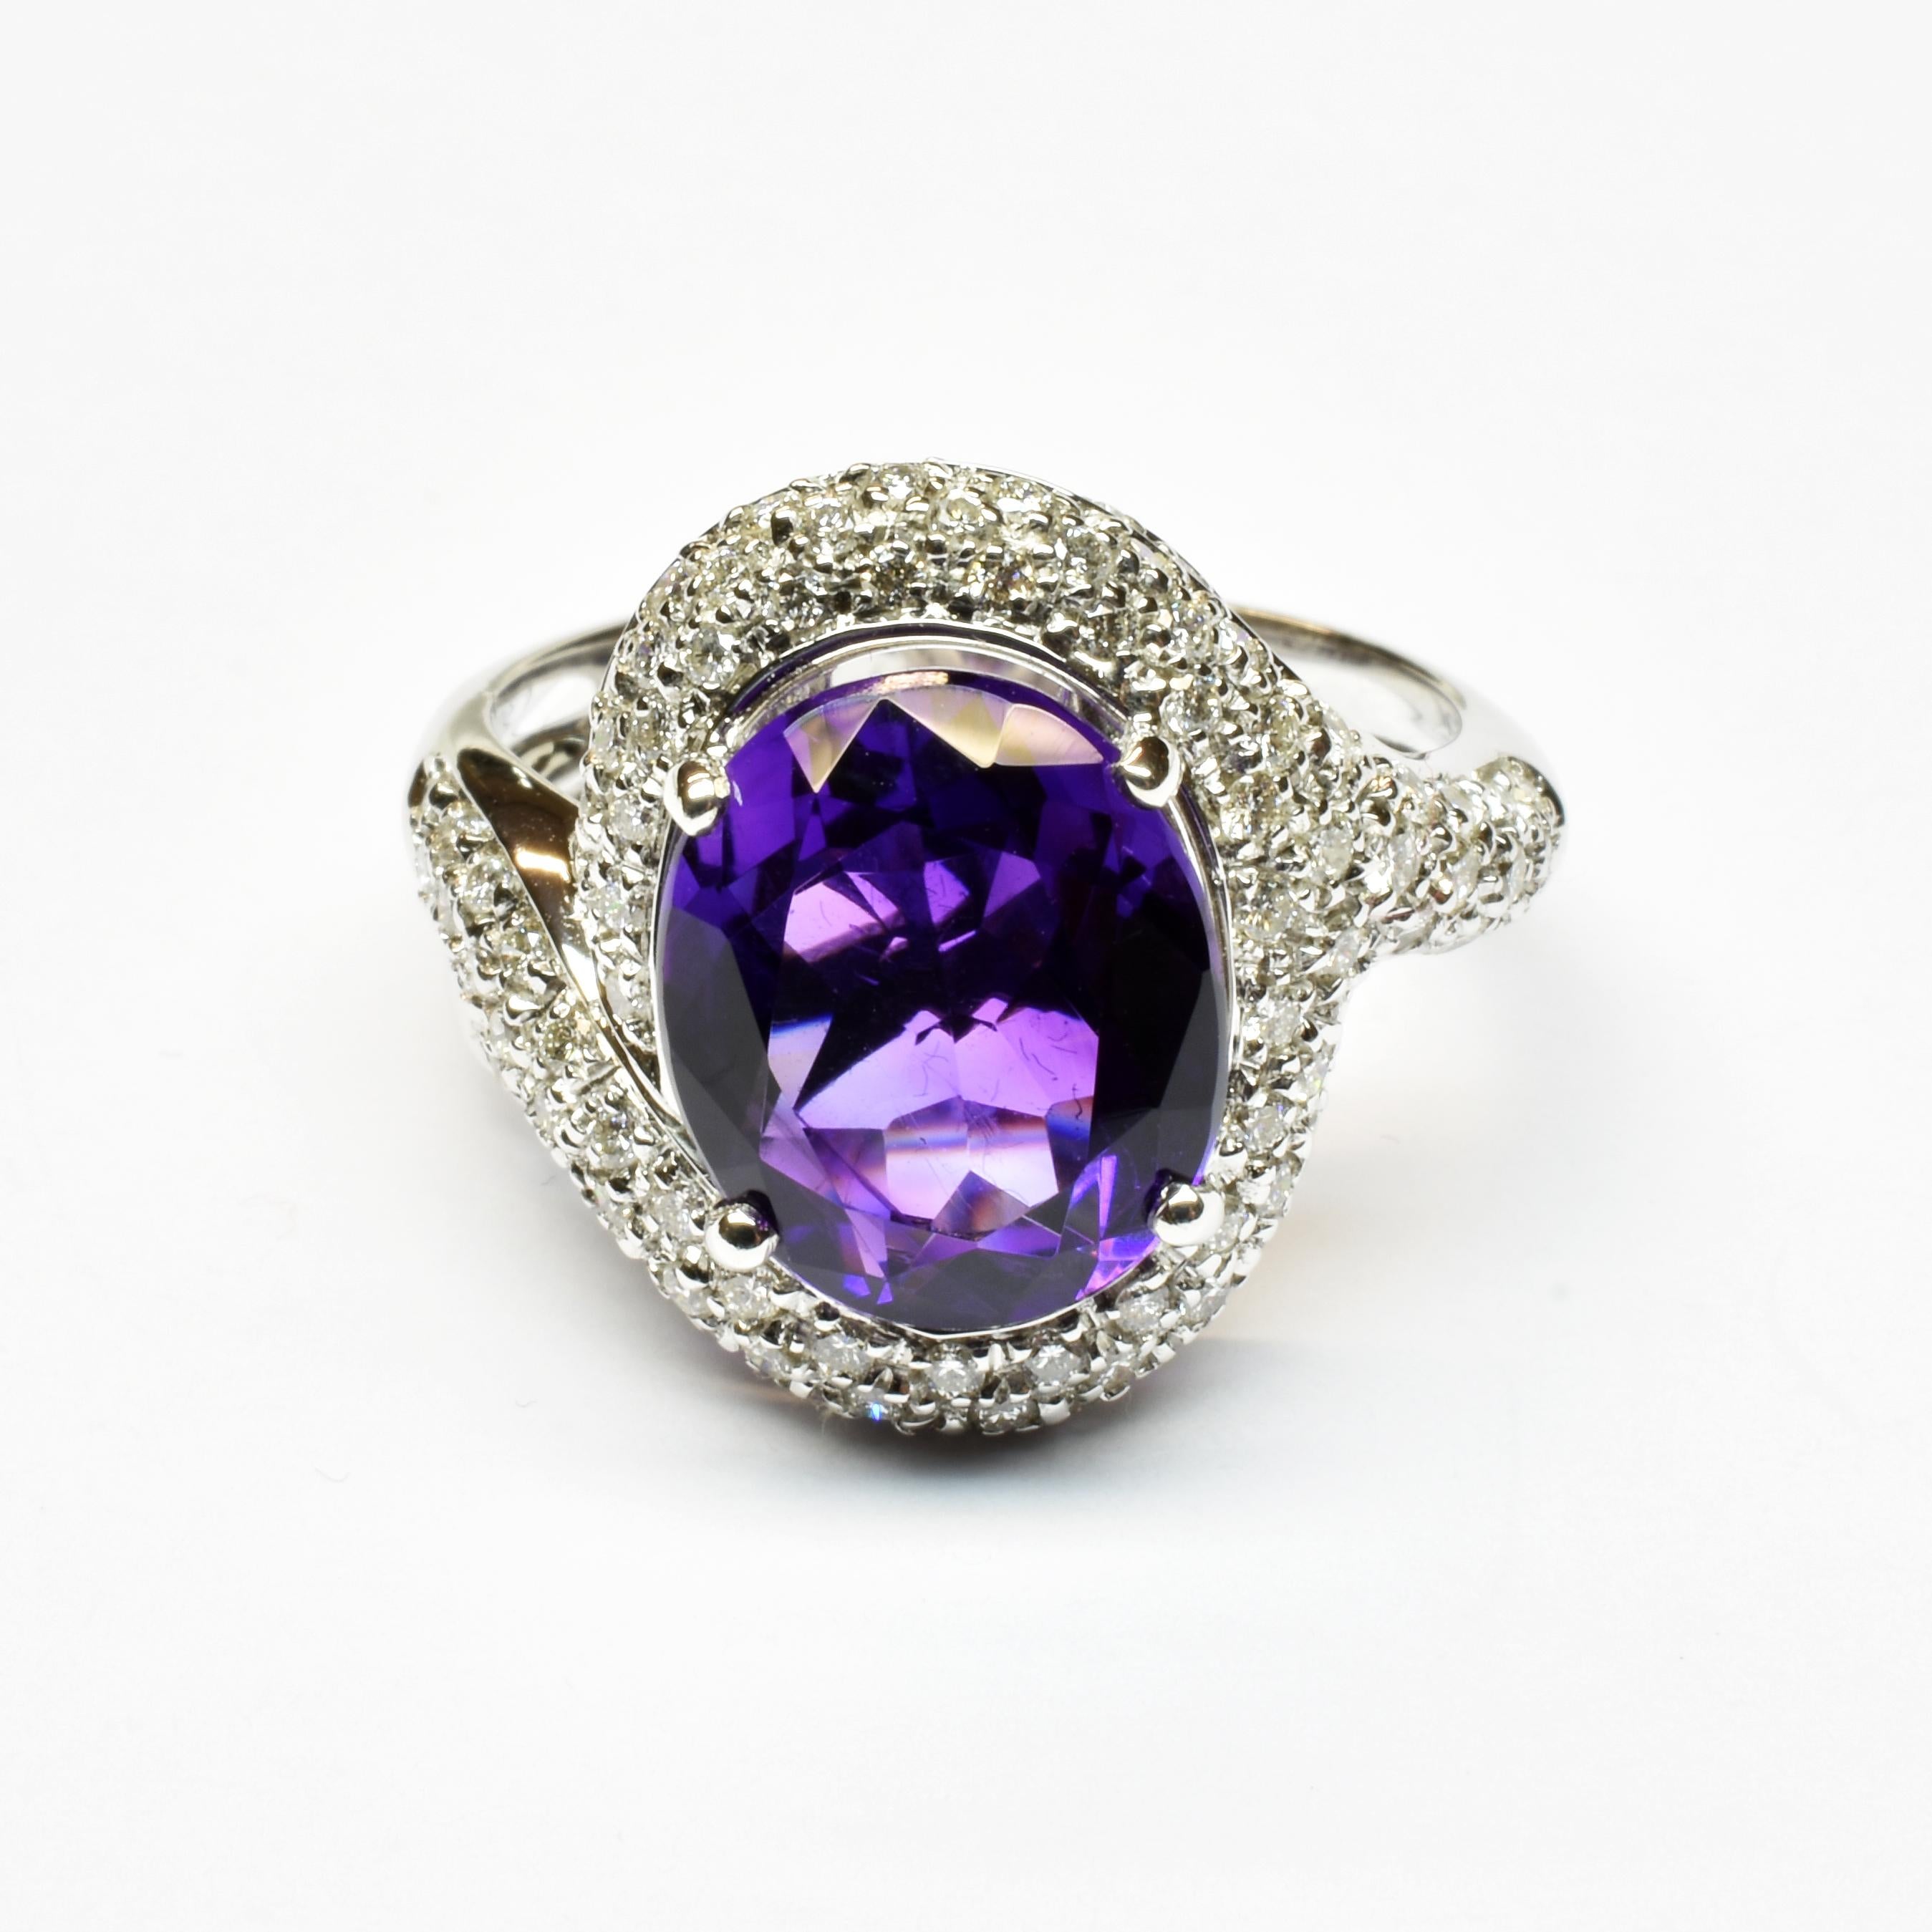 Gilberto Cassola 18Kt White Gold Ring with Oval Shaped Brilliant Cut Amethyst and Diamonds.
Handmade in our Atelier in Valenza Italy.
Oval Brilliant Cut Amethyst mm 12x10 for a weight of ct 5.50. 
G Color Vs Clarity White Diamonds ct 0.95.
18Kt